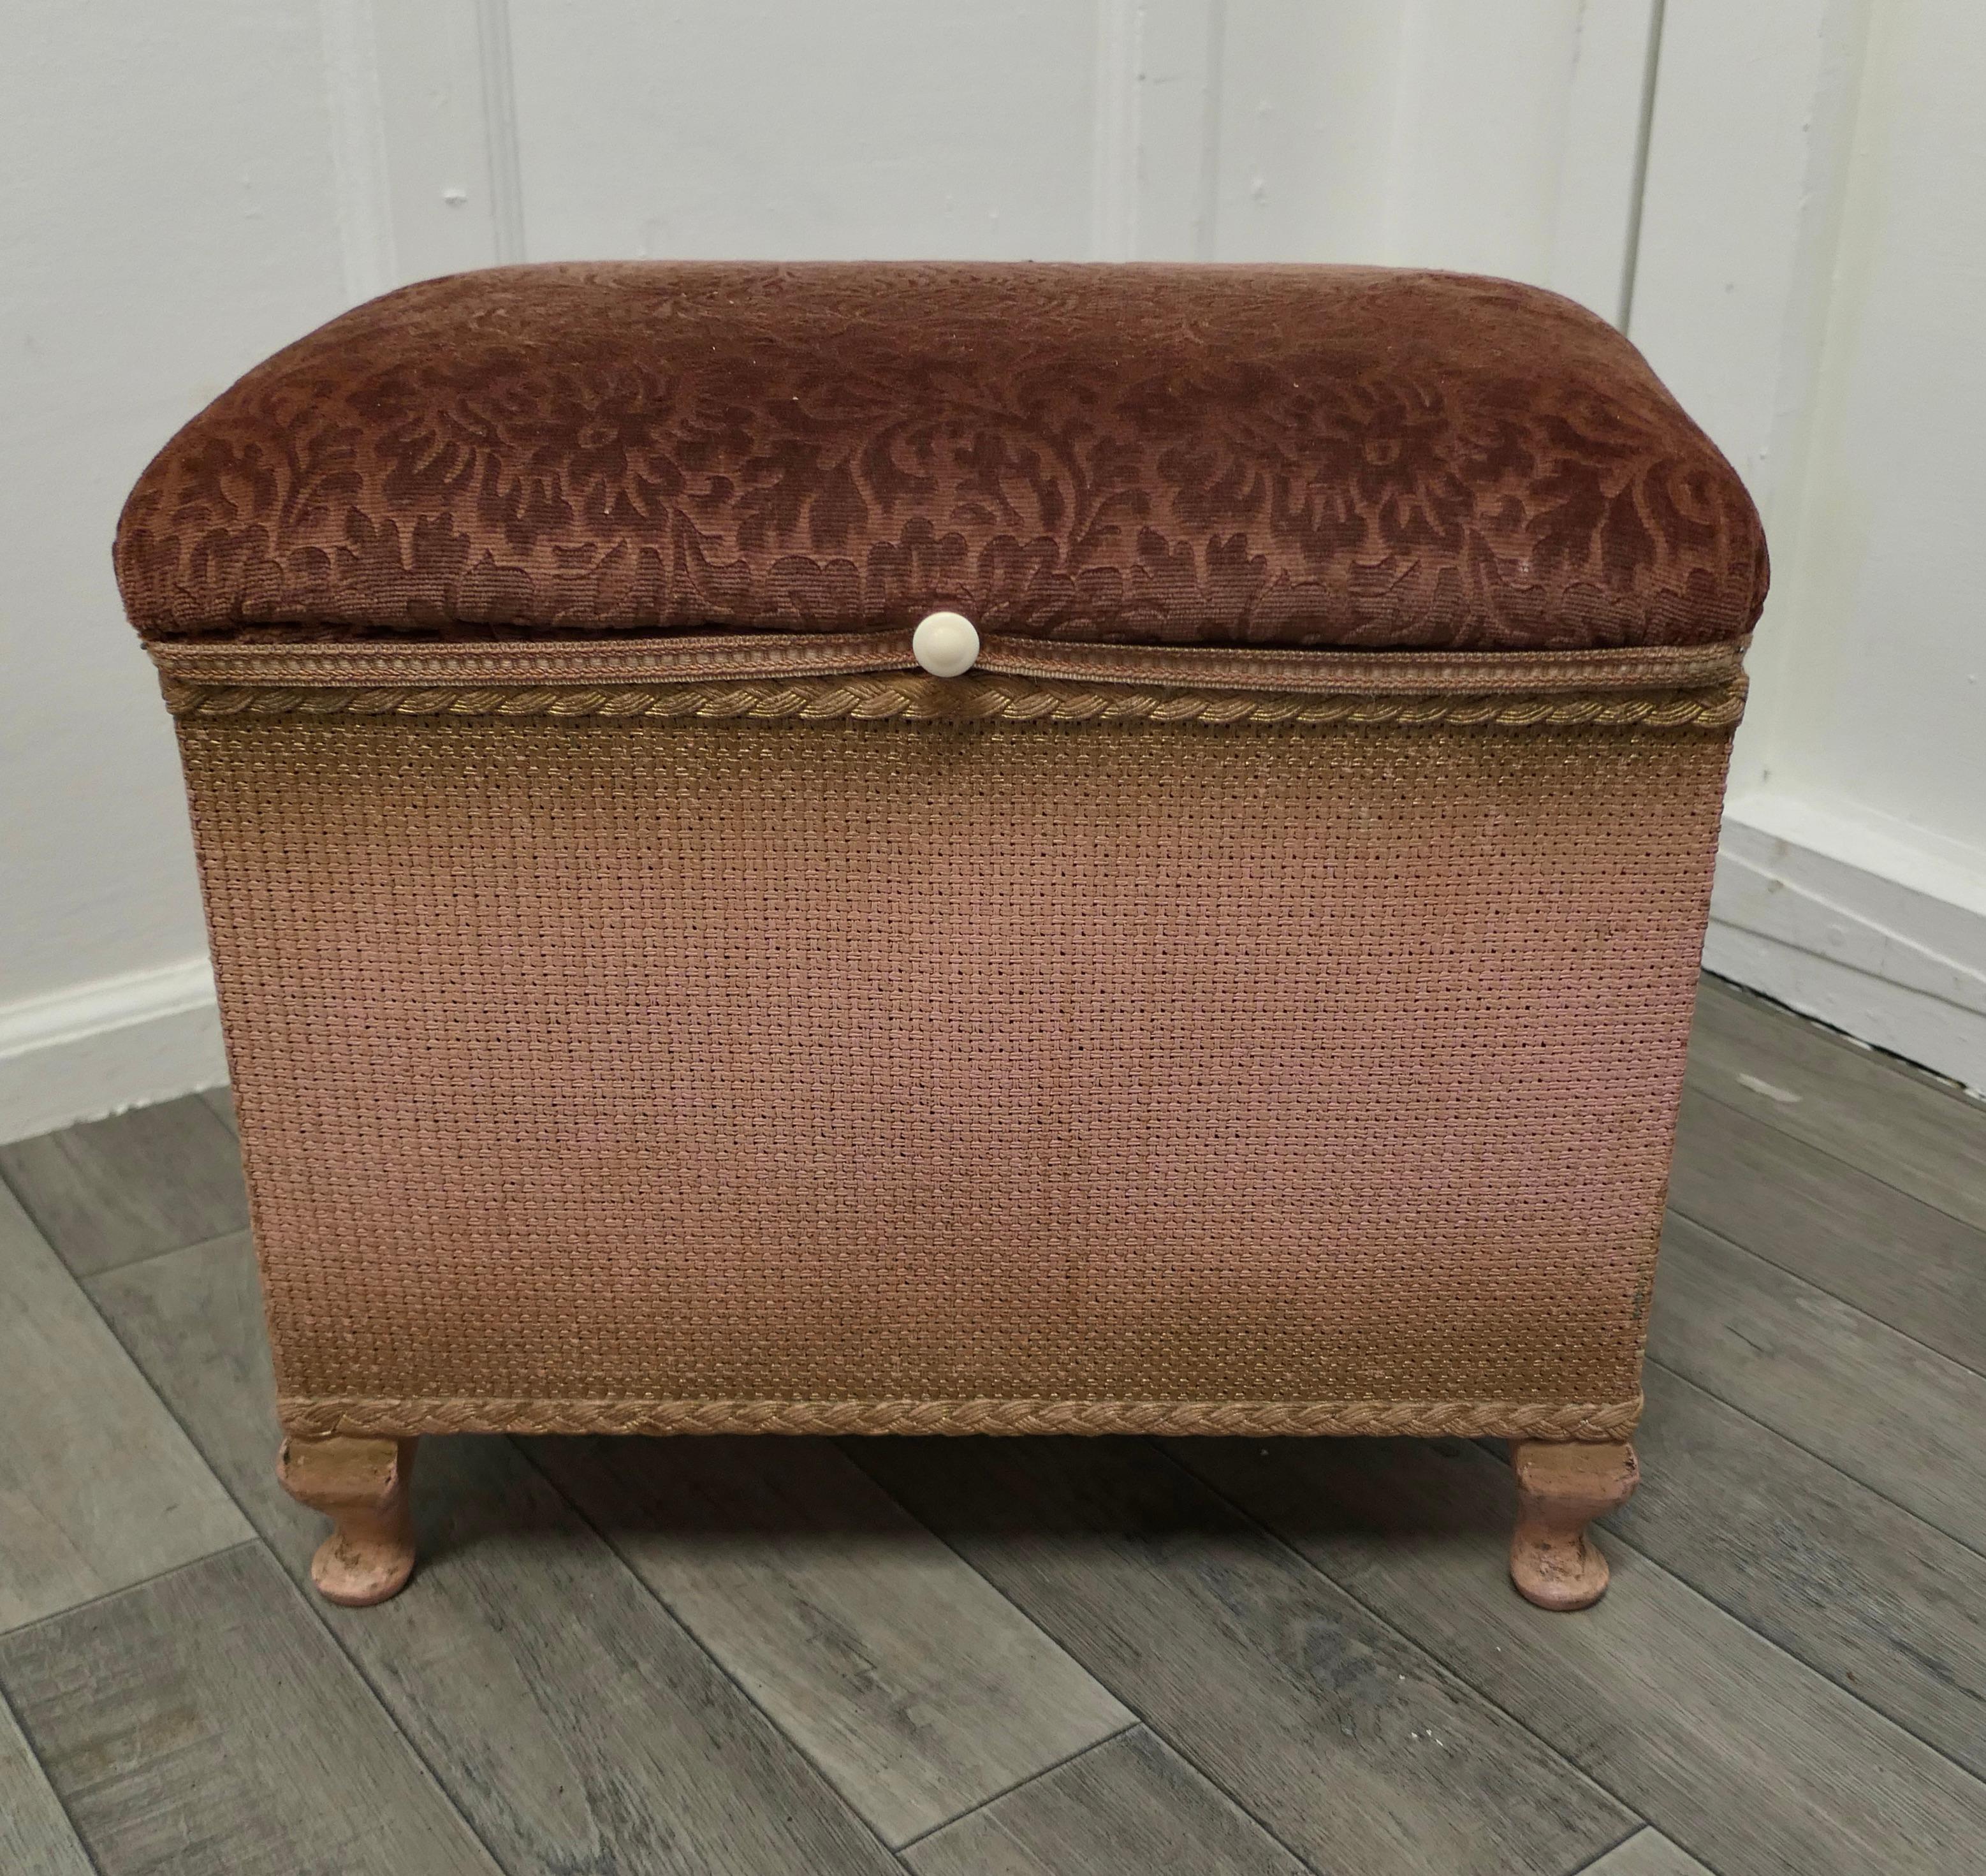 1930s shell pink pressed loom Art Deco ottoman window seat

A useful and stylish piece in original Shell Pink with patterned sculptured velvet upholstery, the seat stands on small cabriole legs
A classic of its time and in good clean used